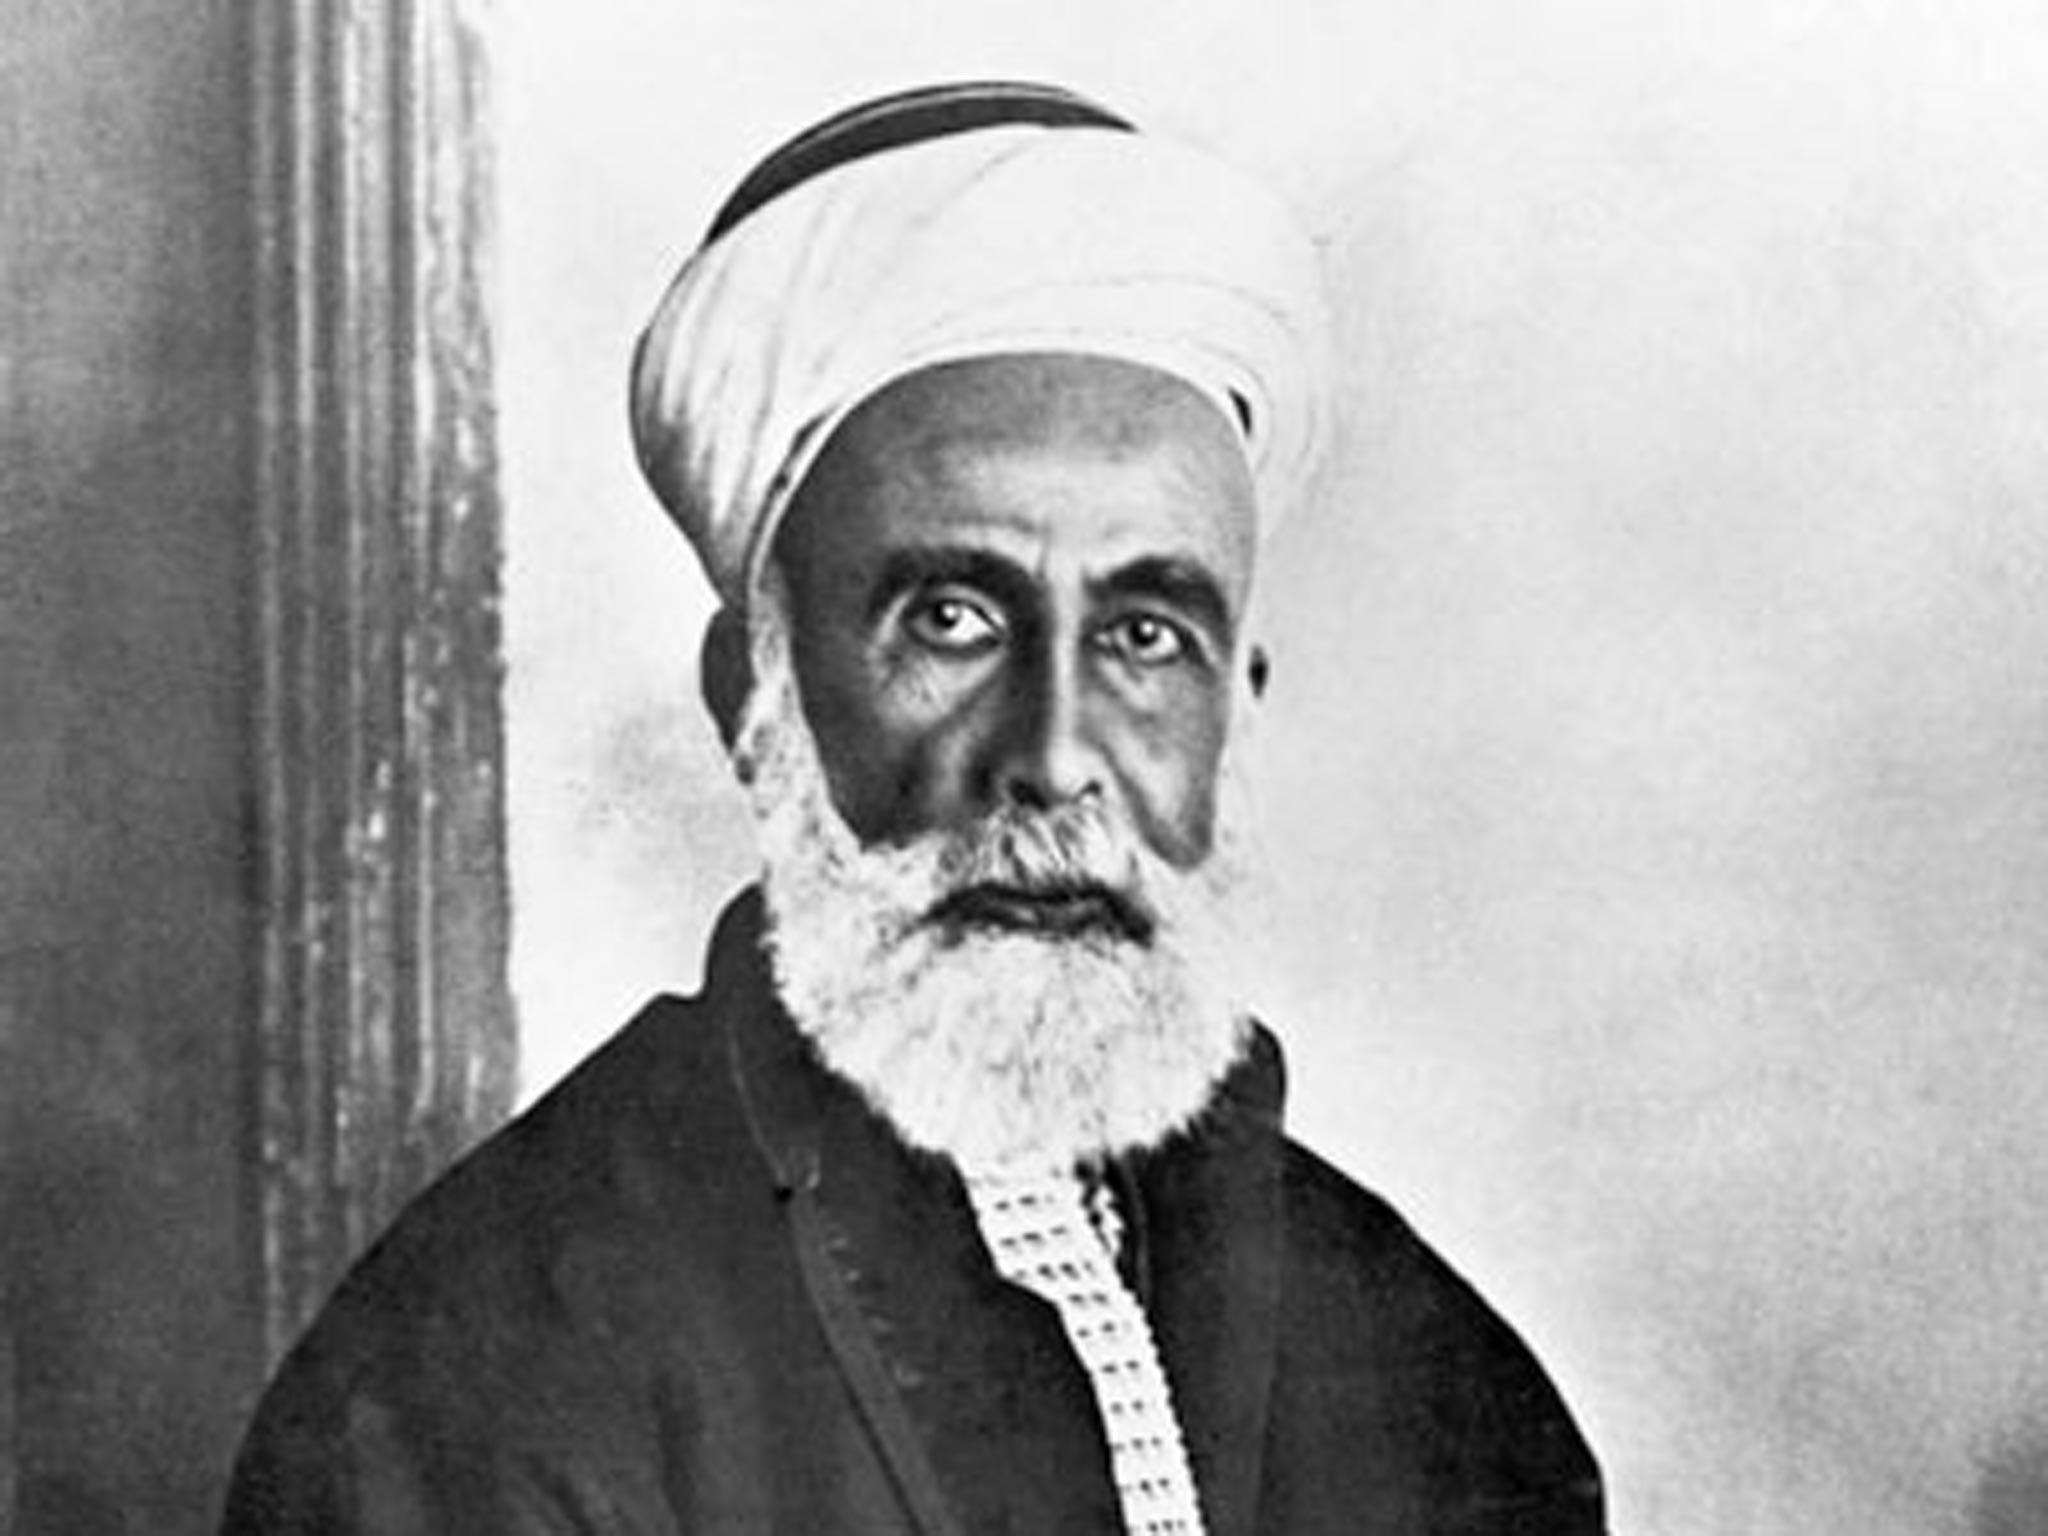 One of the architects of the revolt: Sharif Hussain,
religious leader of Mecca